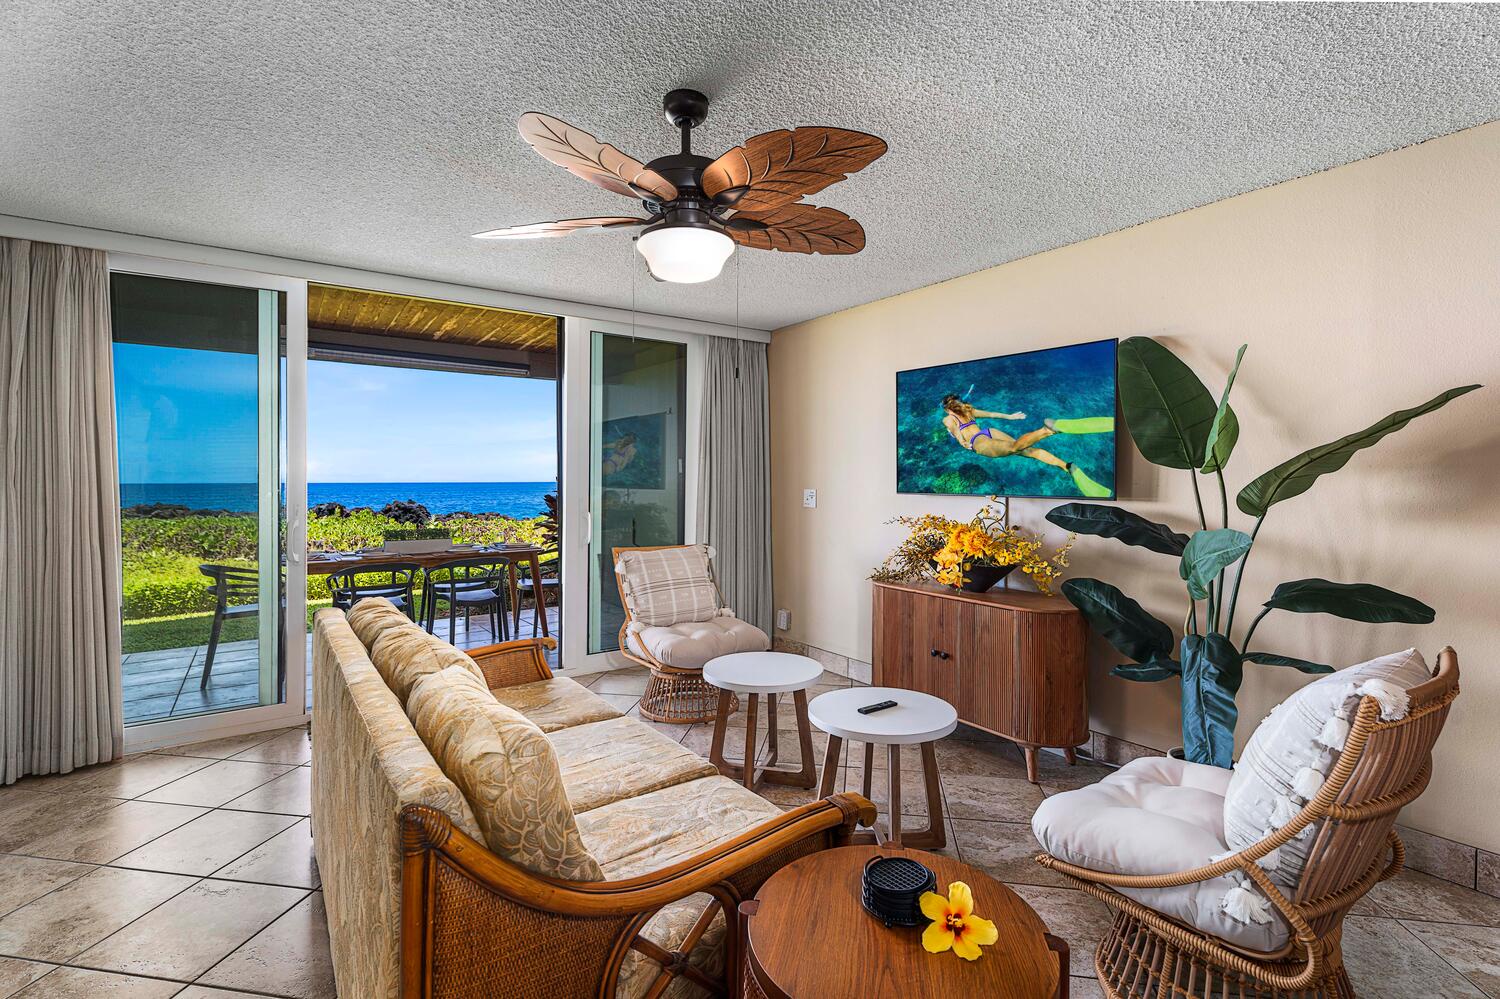 Kailua Kona Vacation Rentals, Keauhou Kona Surf & Racquet 1104 - Embrace the laid-back charm of island living, where the warmth of the sun meets the soothing rhythm of the waves.